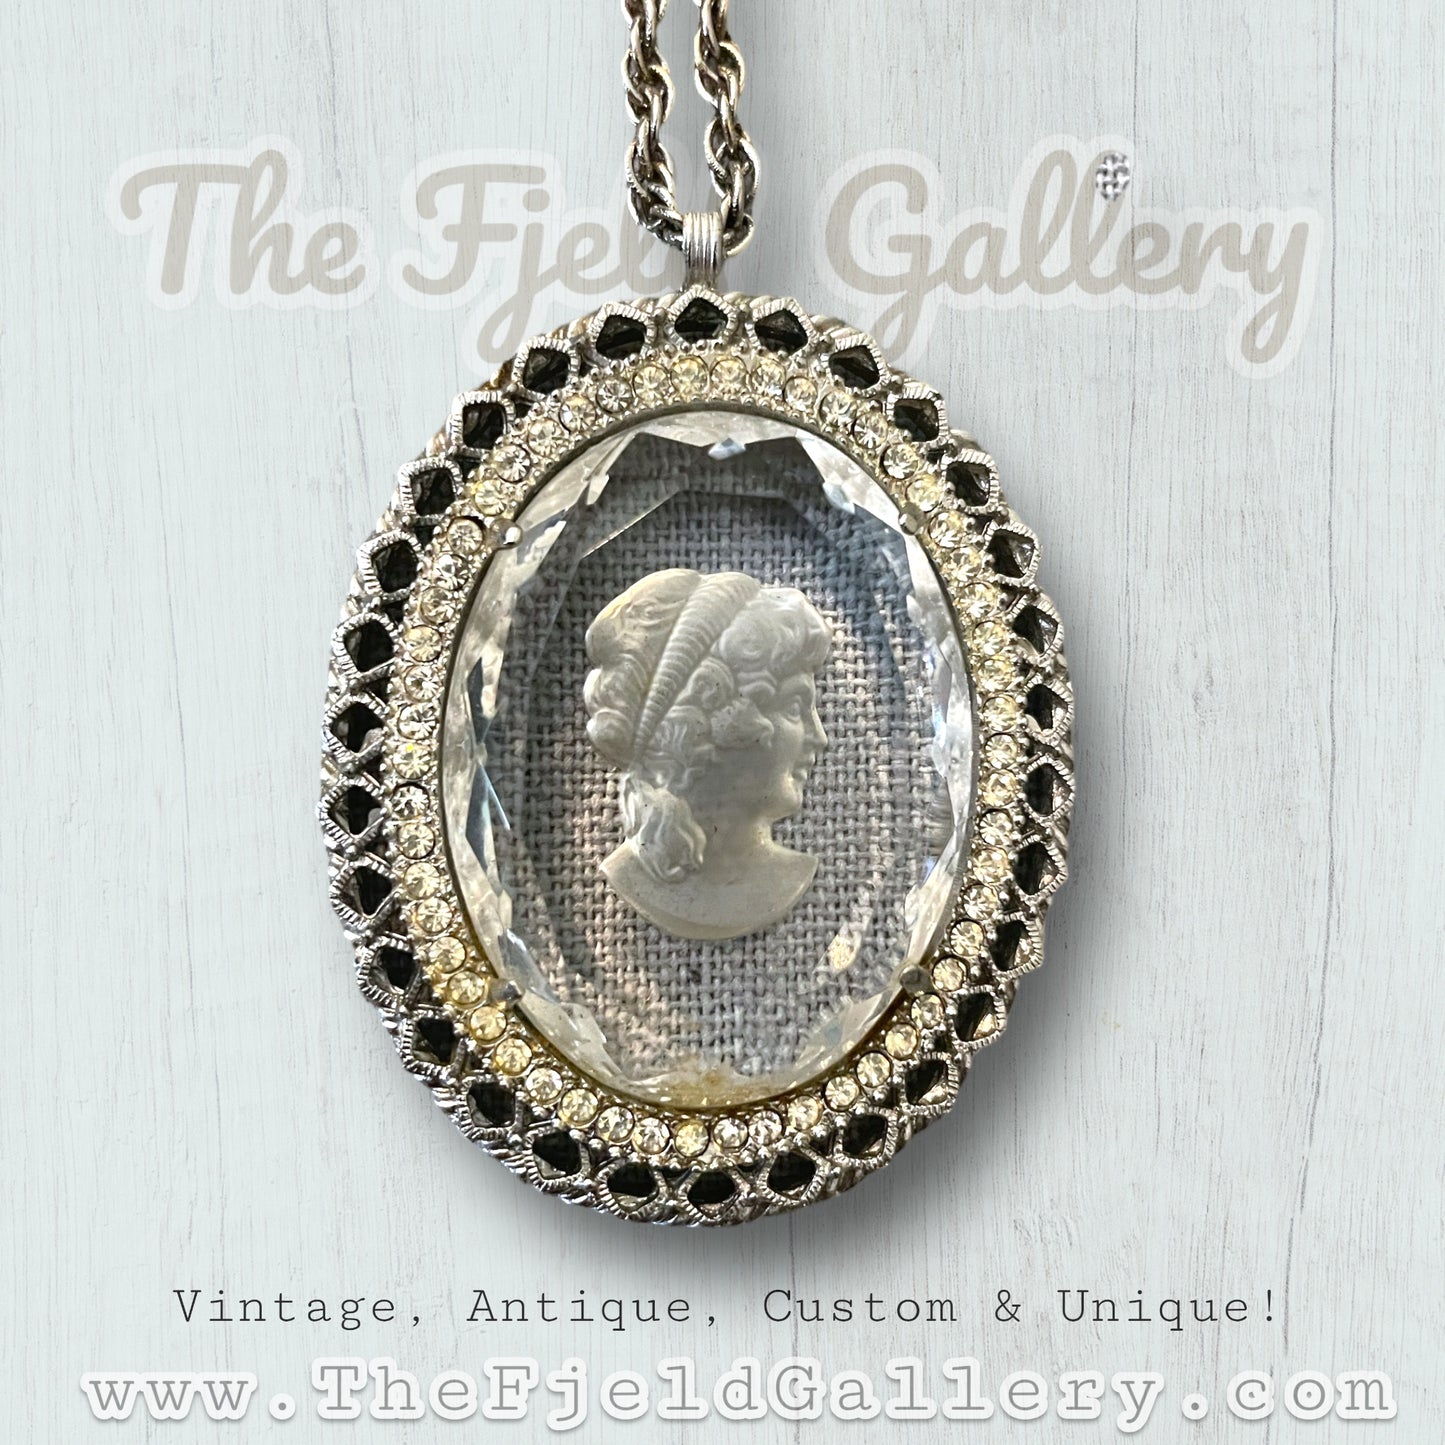 Vintage 1950’s Intaglio Cameo Clear Faceted Glass in Crystal Rhinestone Silver Setting Necklace